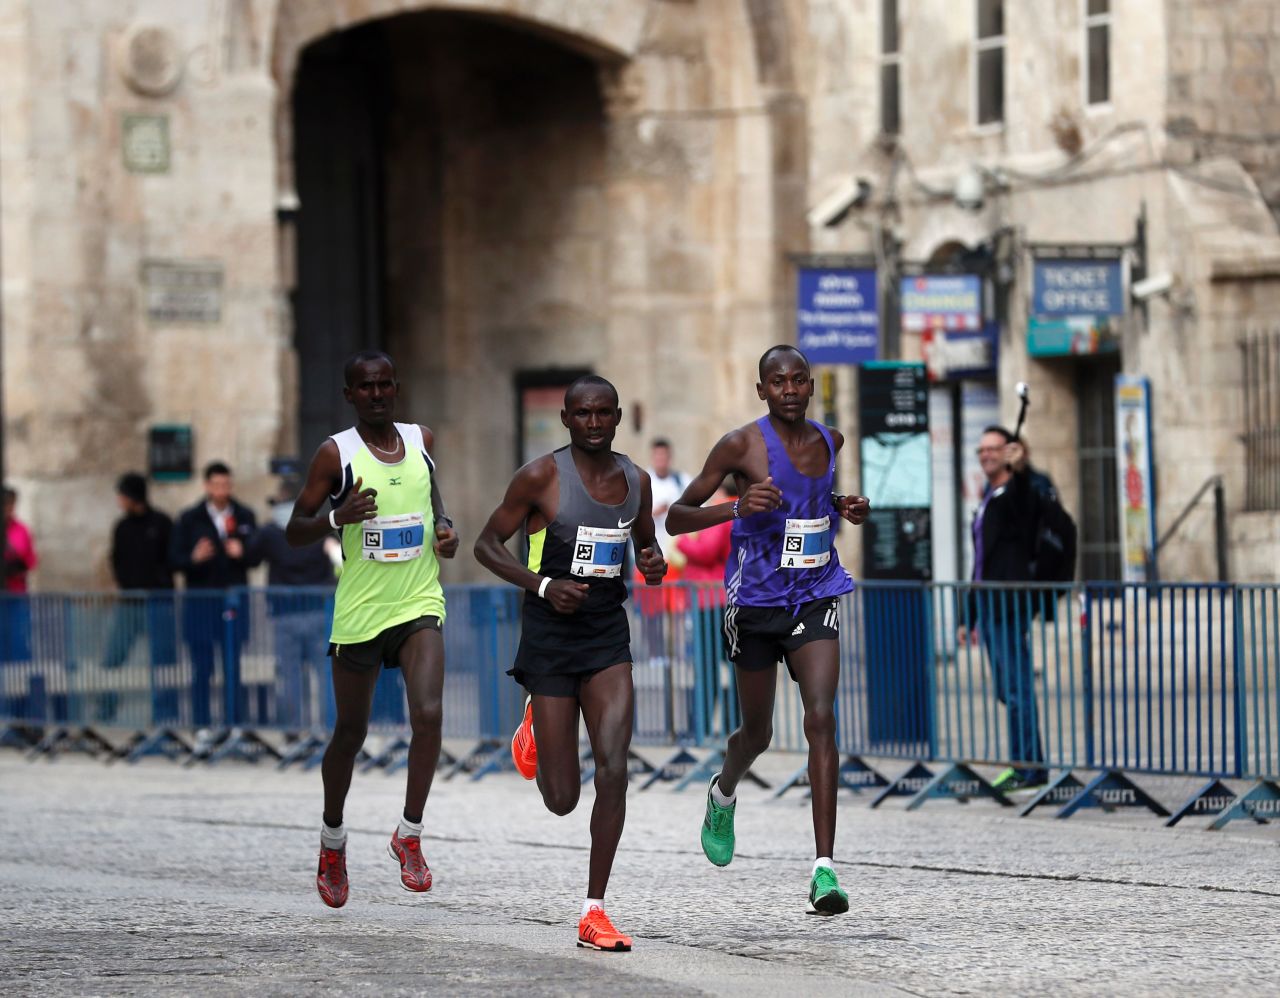 Kenya's Shadrack Kipkosgei (right) won the marathon for the second year in a row, in a time of 2:17:36, picking up the $3,750 prize. Ethiopia's Wendwesen Tilahun Damte (left) was second and Kenya's Matthew Kibiwott Sang (center) was third.